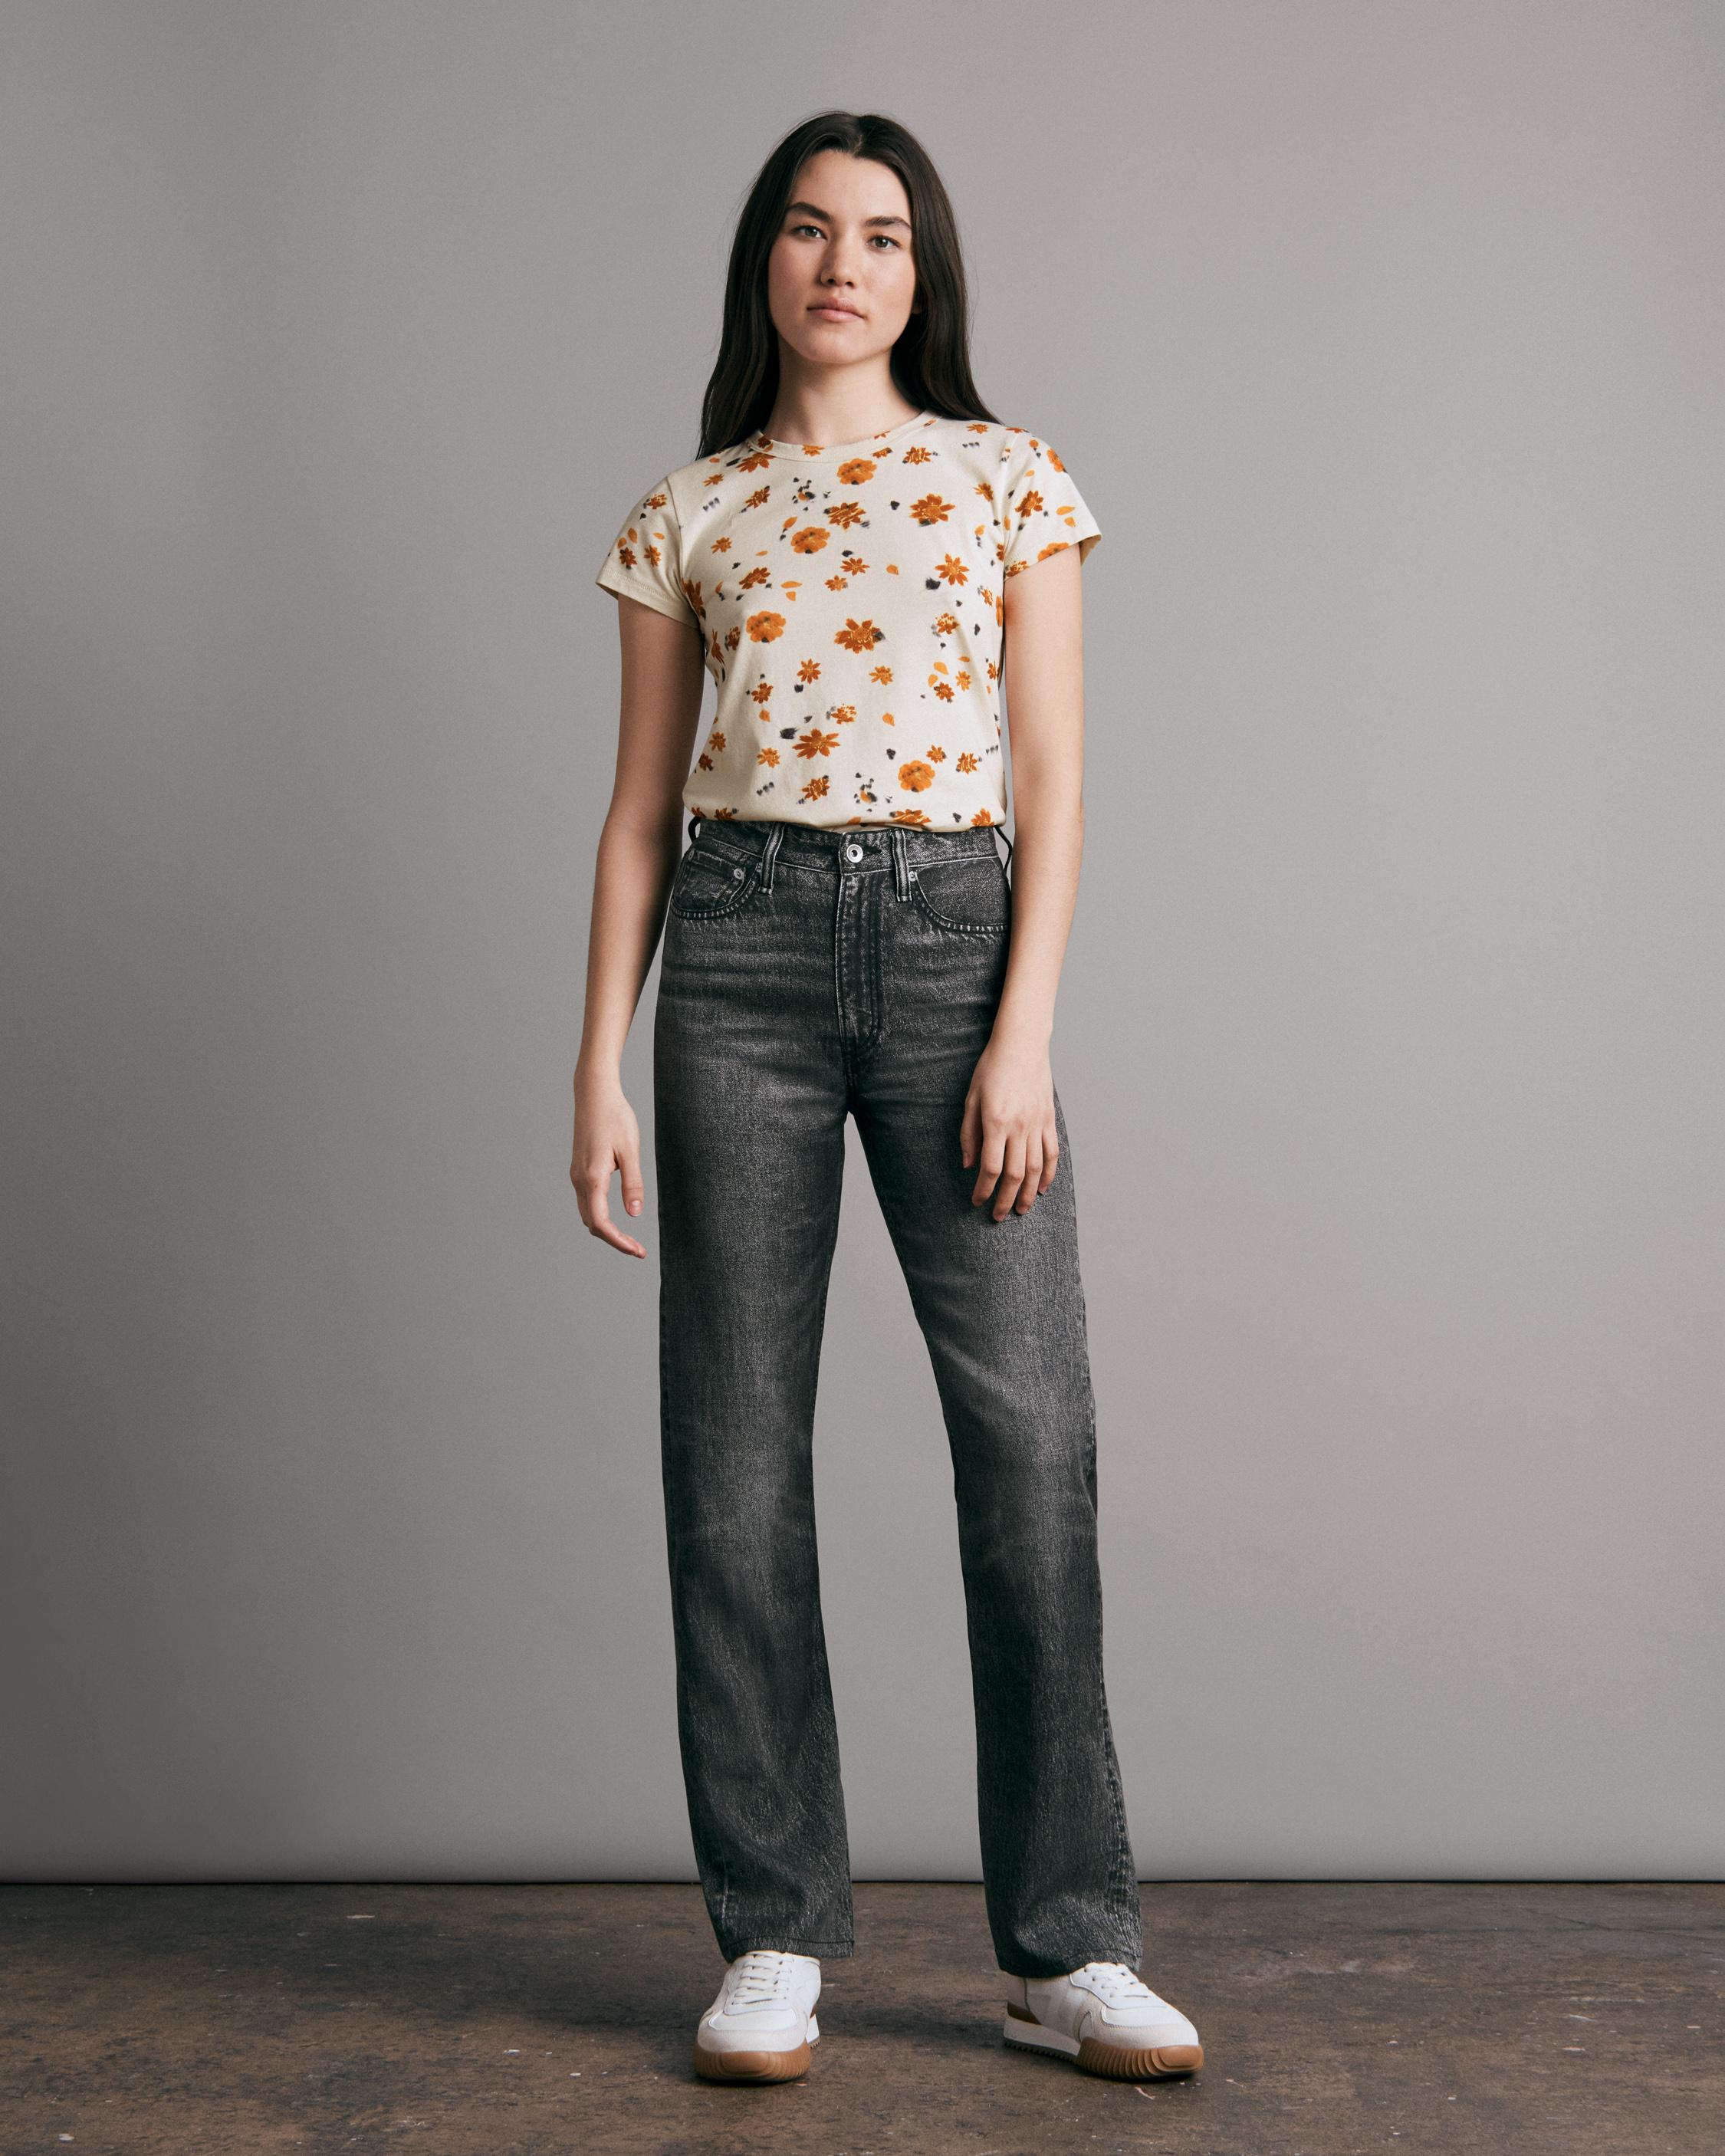 All Over Floral Tee - Ivory | rag & bone